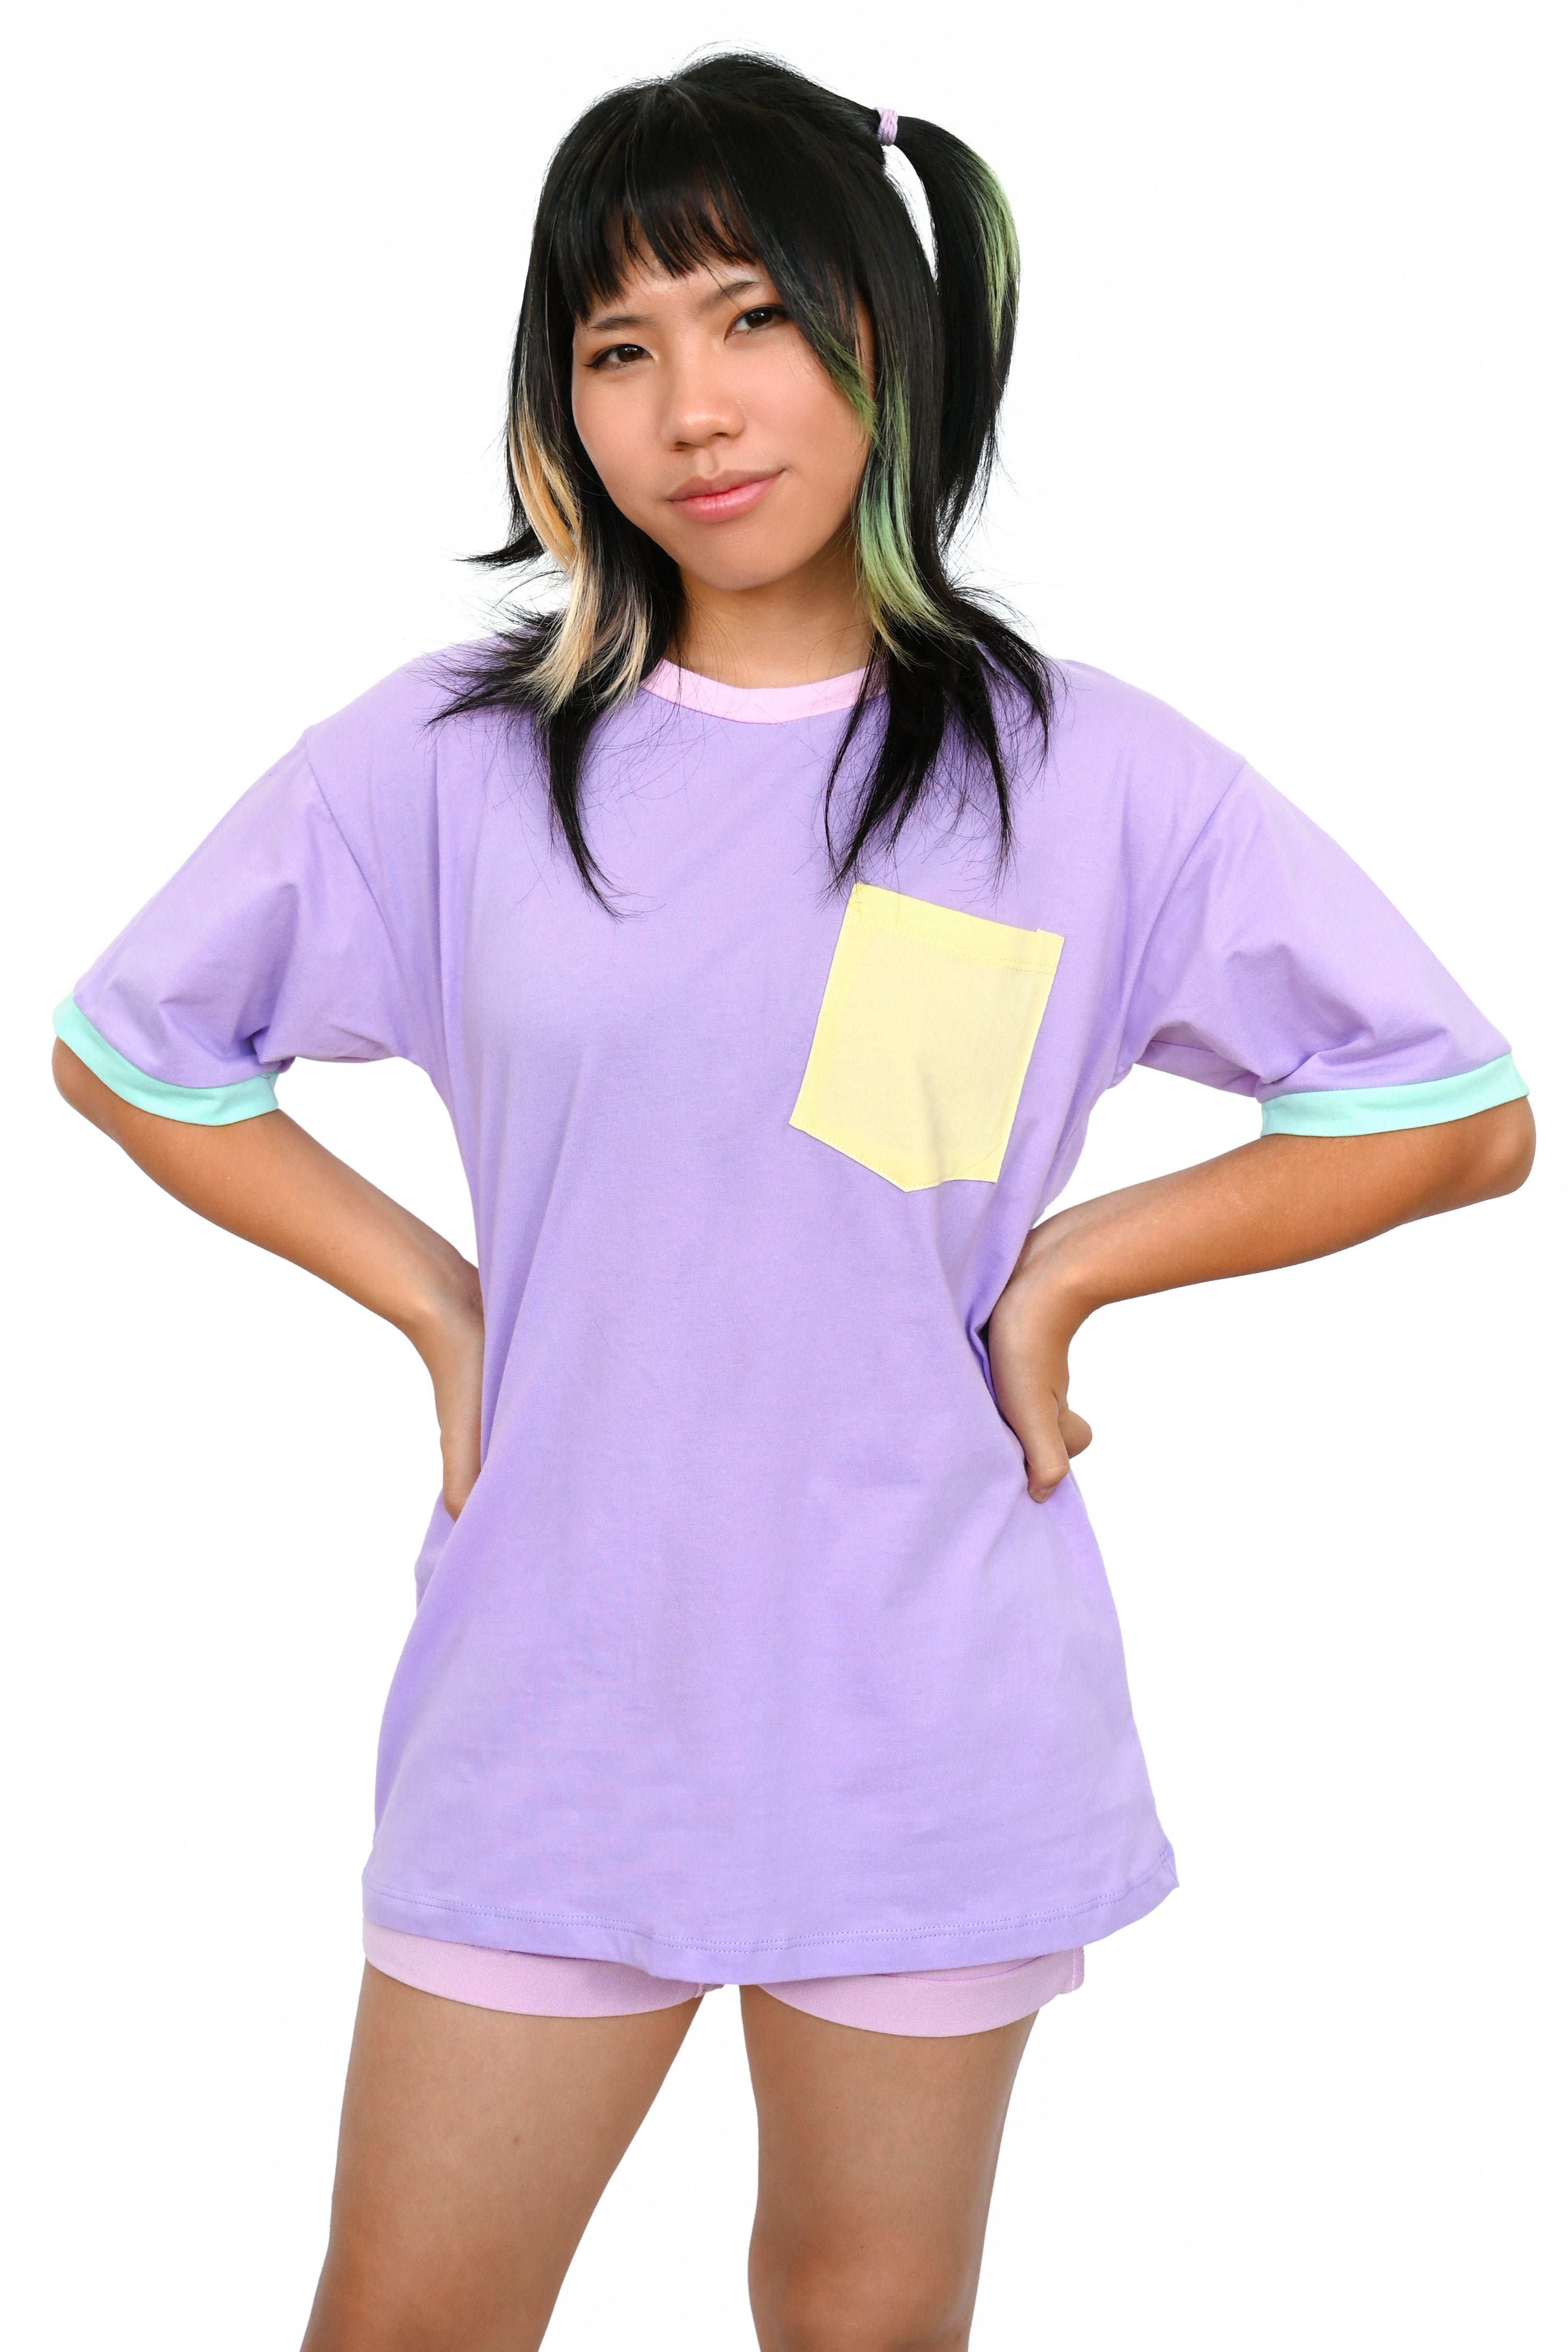 Model wearing oversized lavender tee with mint and pink trim and yellow lapel pocket